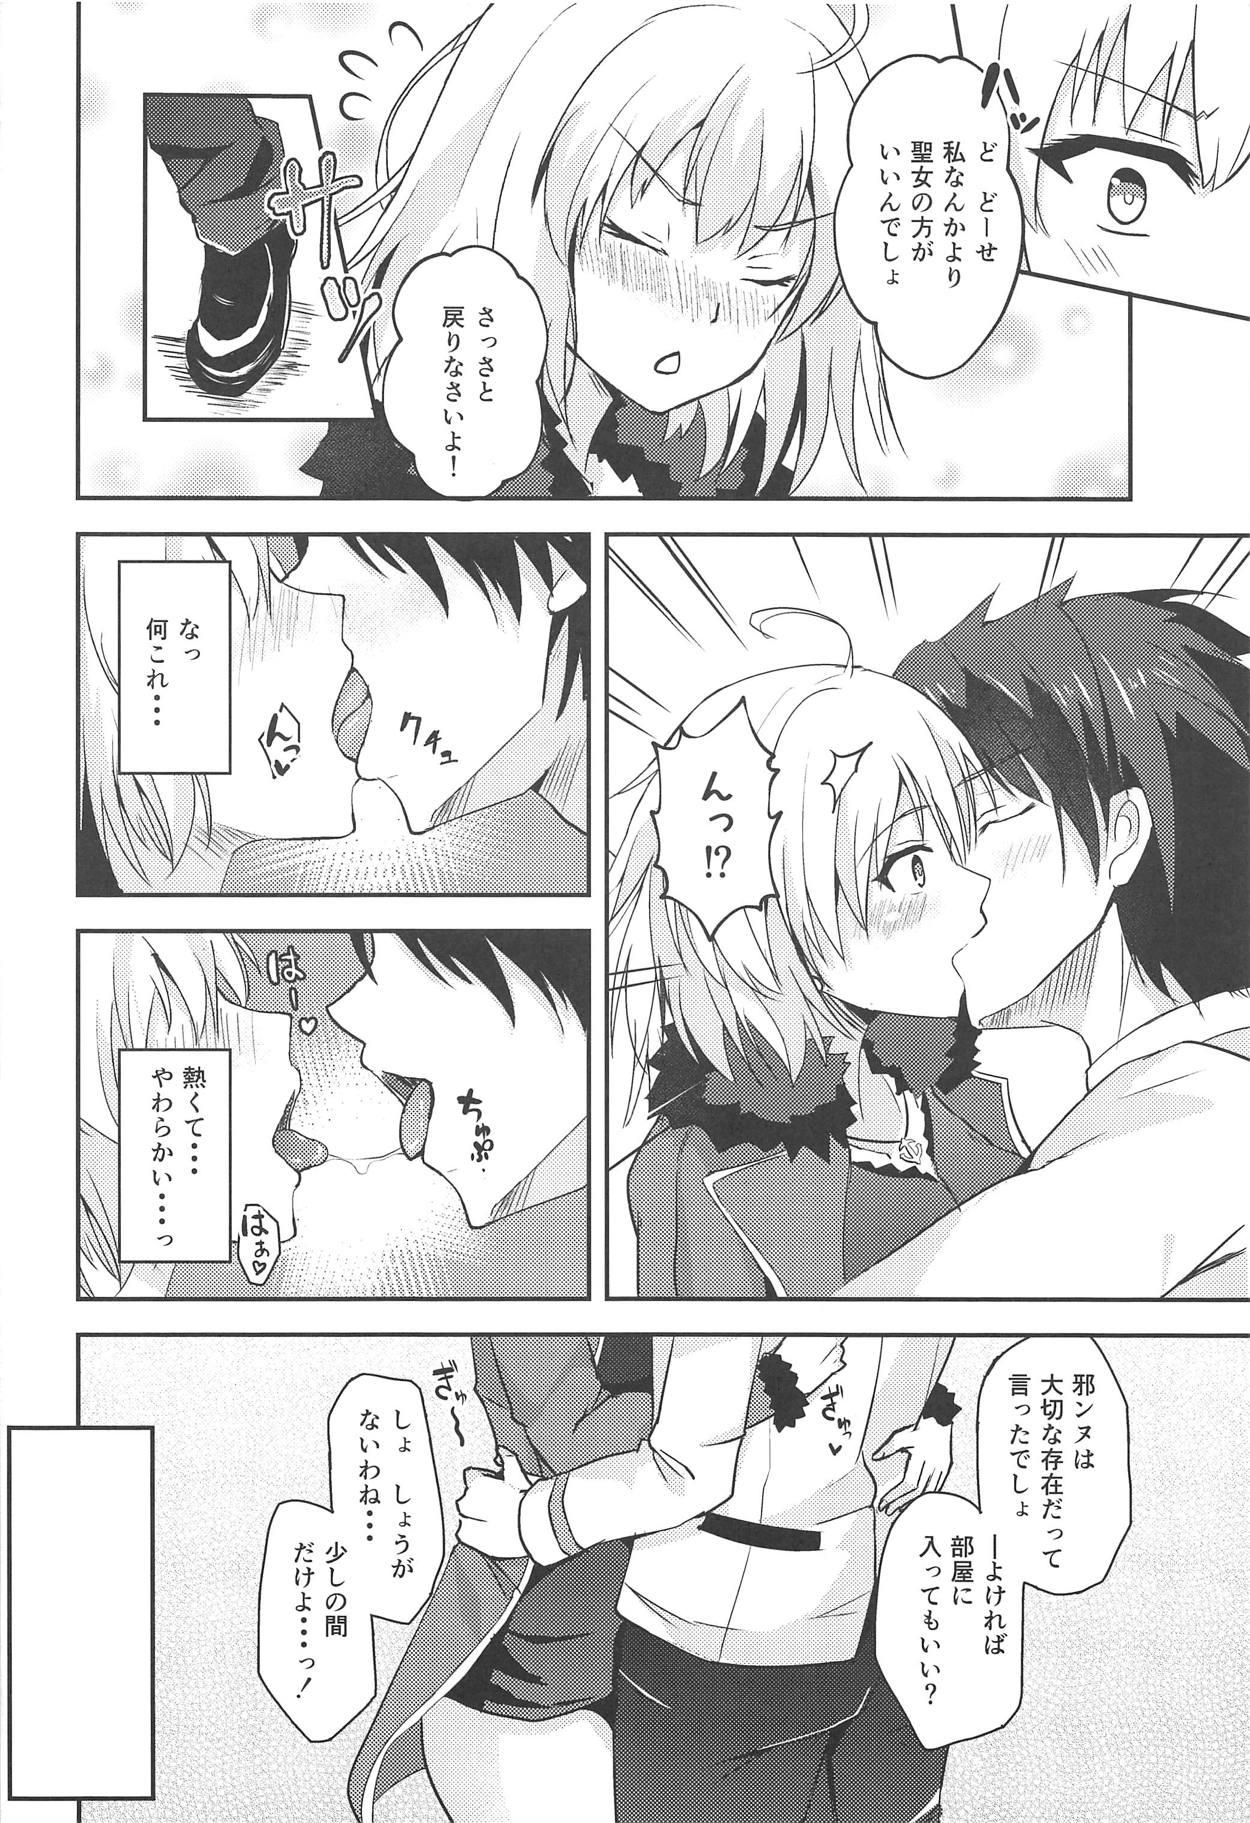 Old Man Jeanne Alter to Ecchi Shitai!! - Fate grand order Celebrities - Page 6